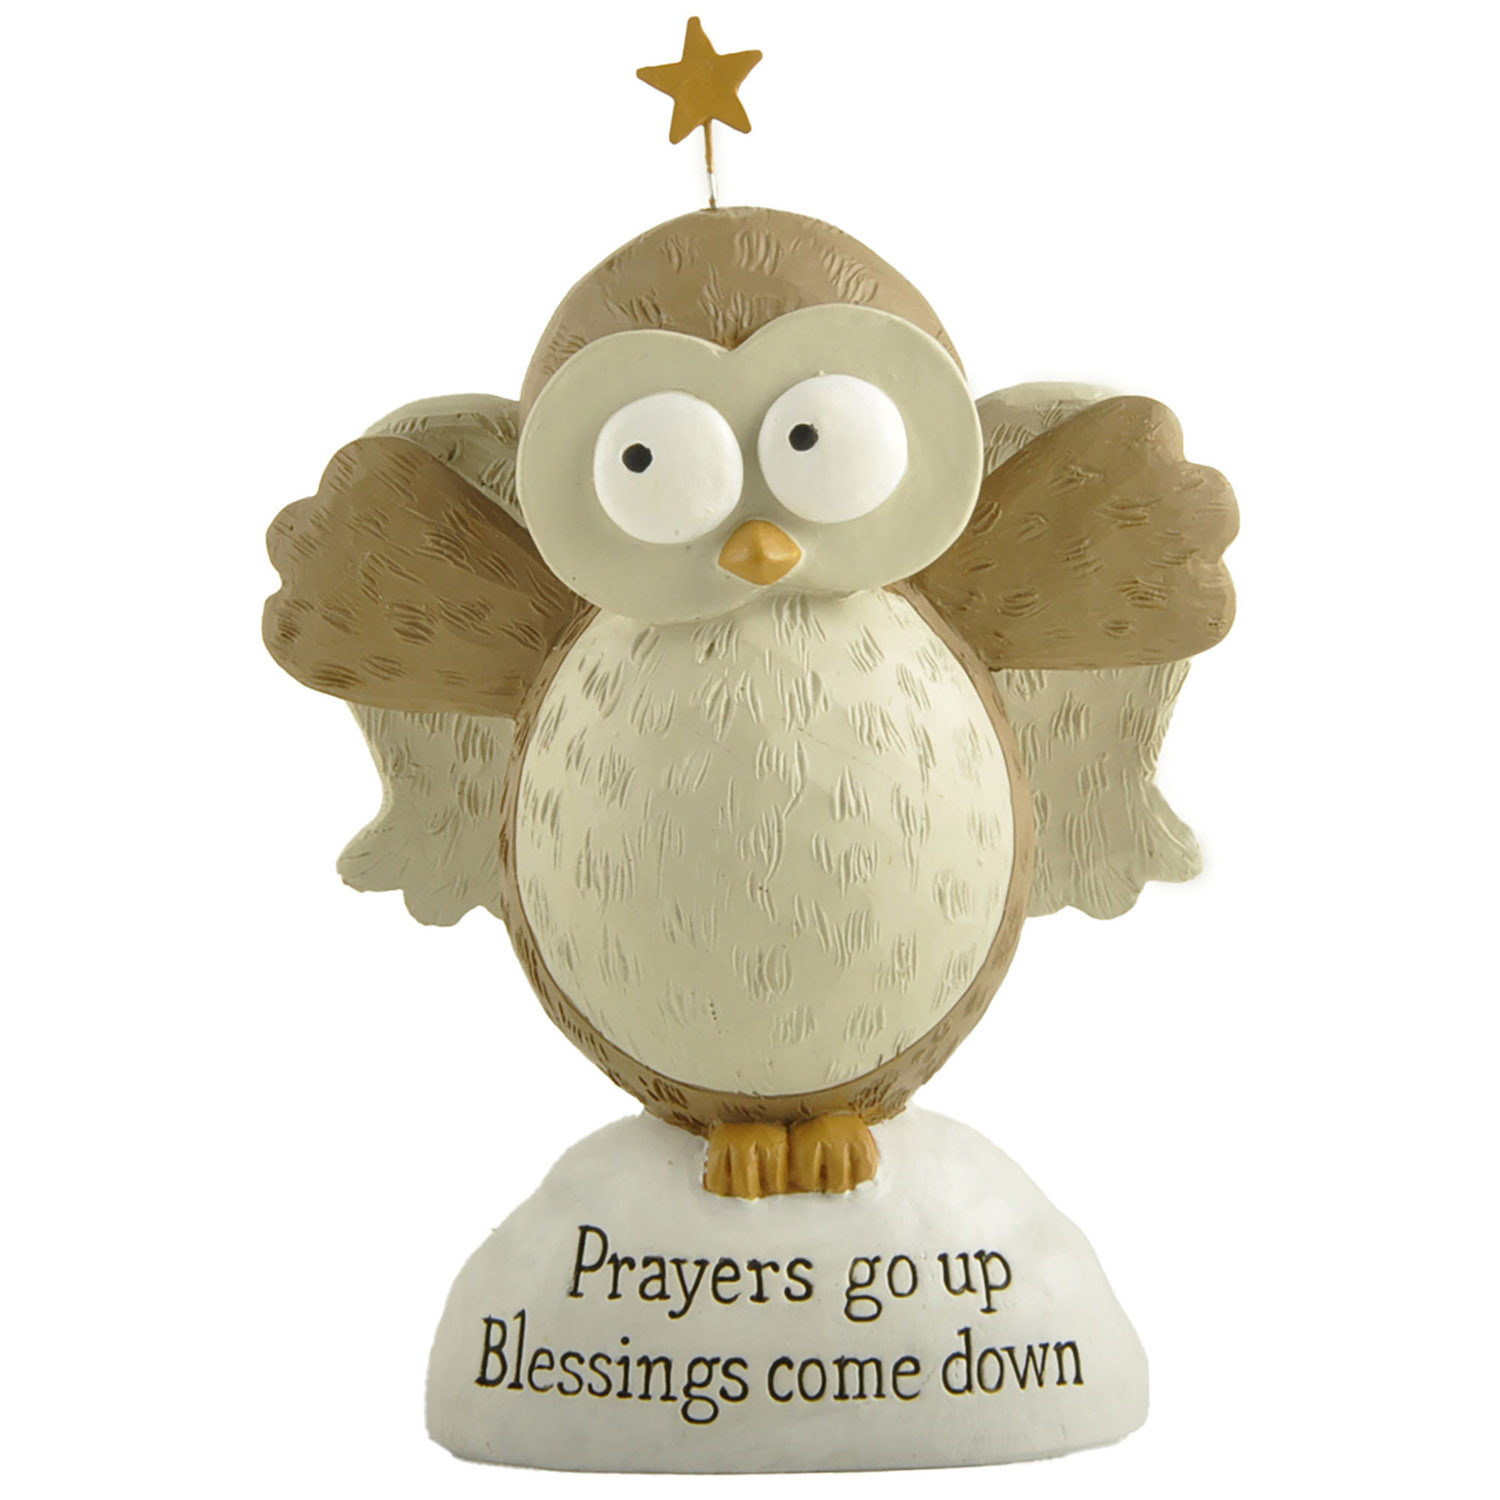 Inspirational Resin Owl Figurine with Star and Message – 'Prayers Go Up, Blessings Come Down' – Uplifting Home Decor 238-13899